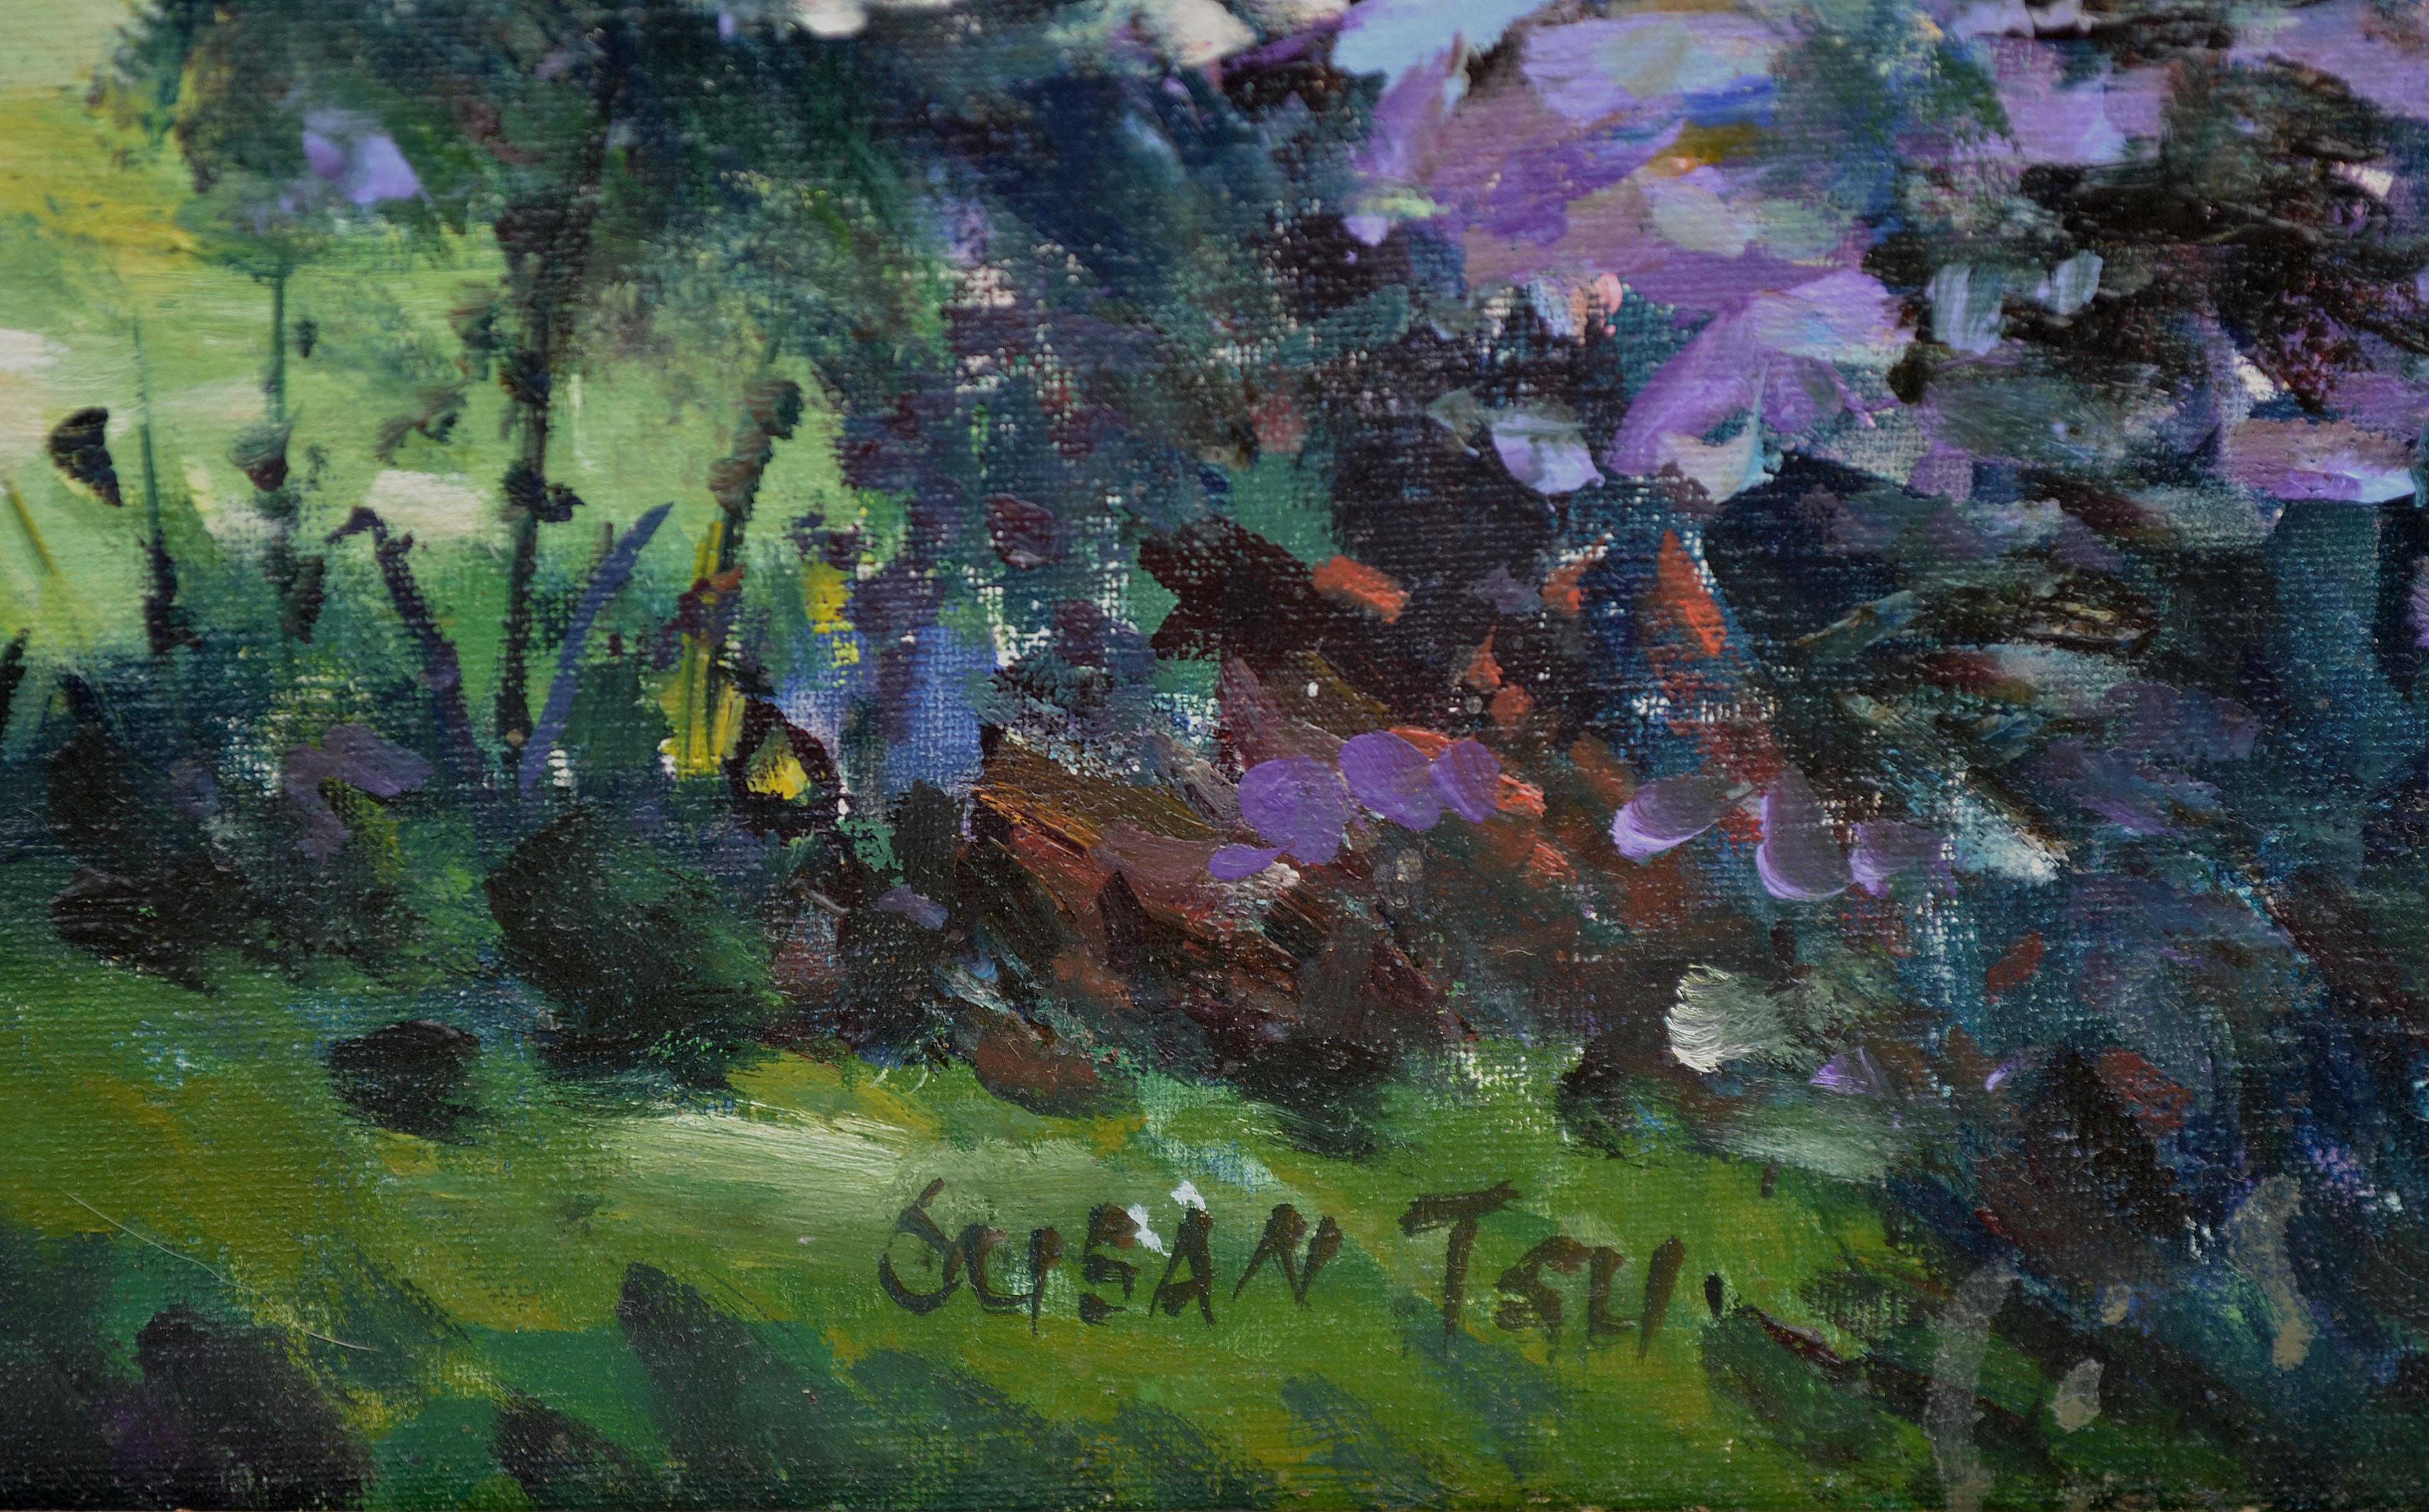 Bench in the Spring Forest Landscape - American Impressionist Painting by Susan F. Tsu